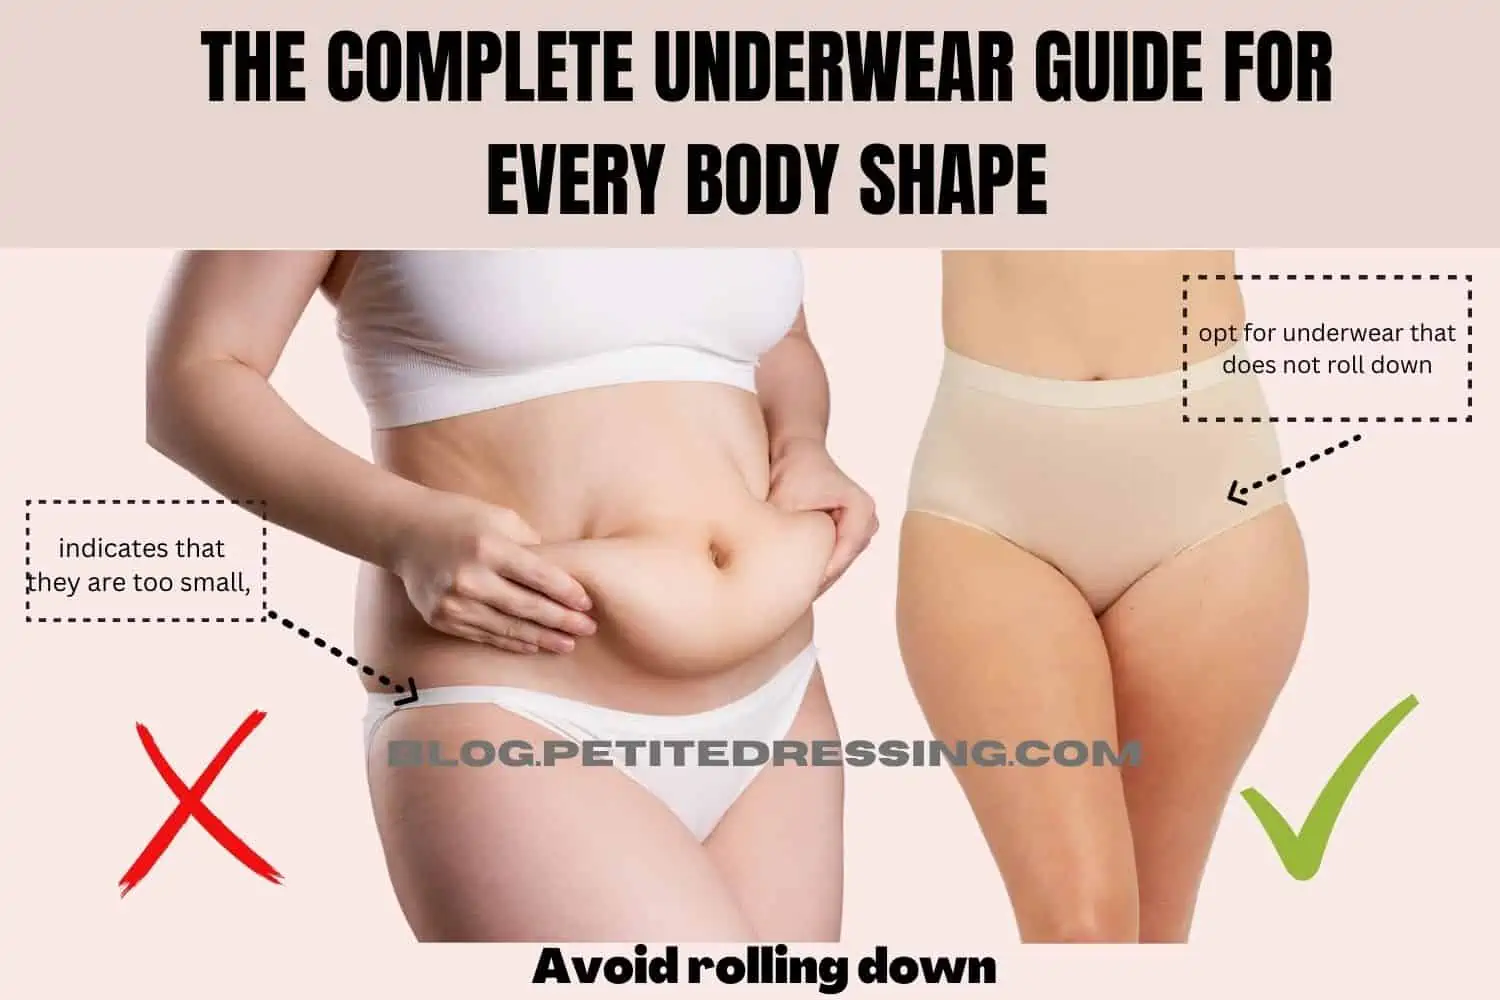 Finding the Best Underwear For Your Body Type I A Beginners Guide – s o m e  w h e r e UNKNOWN